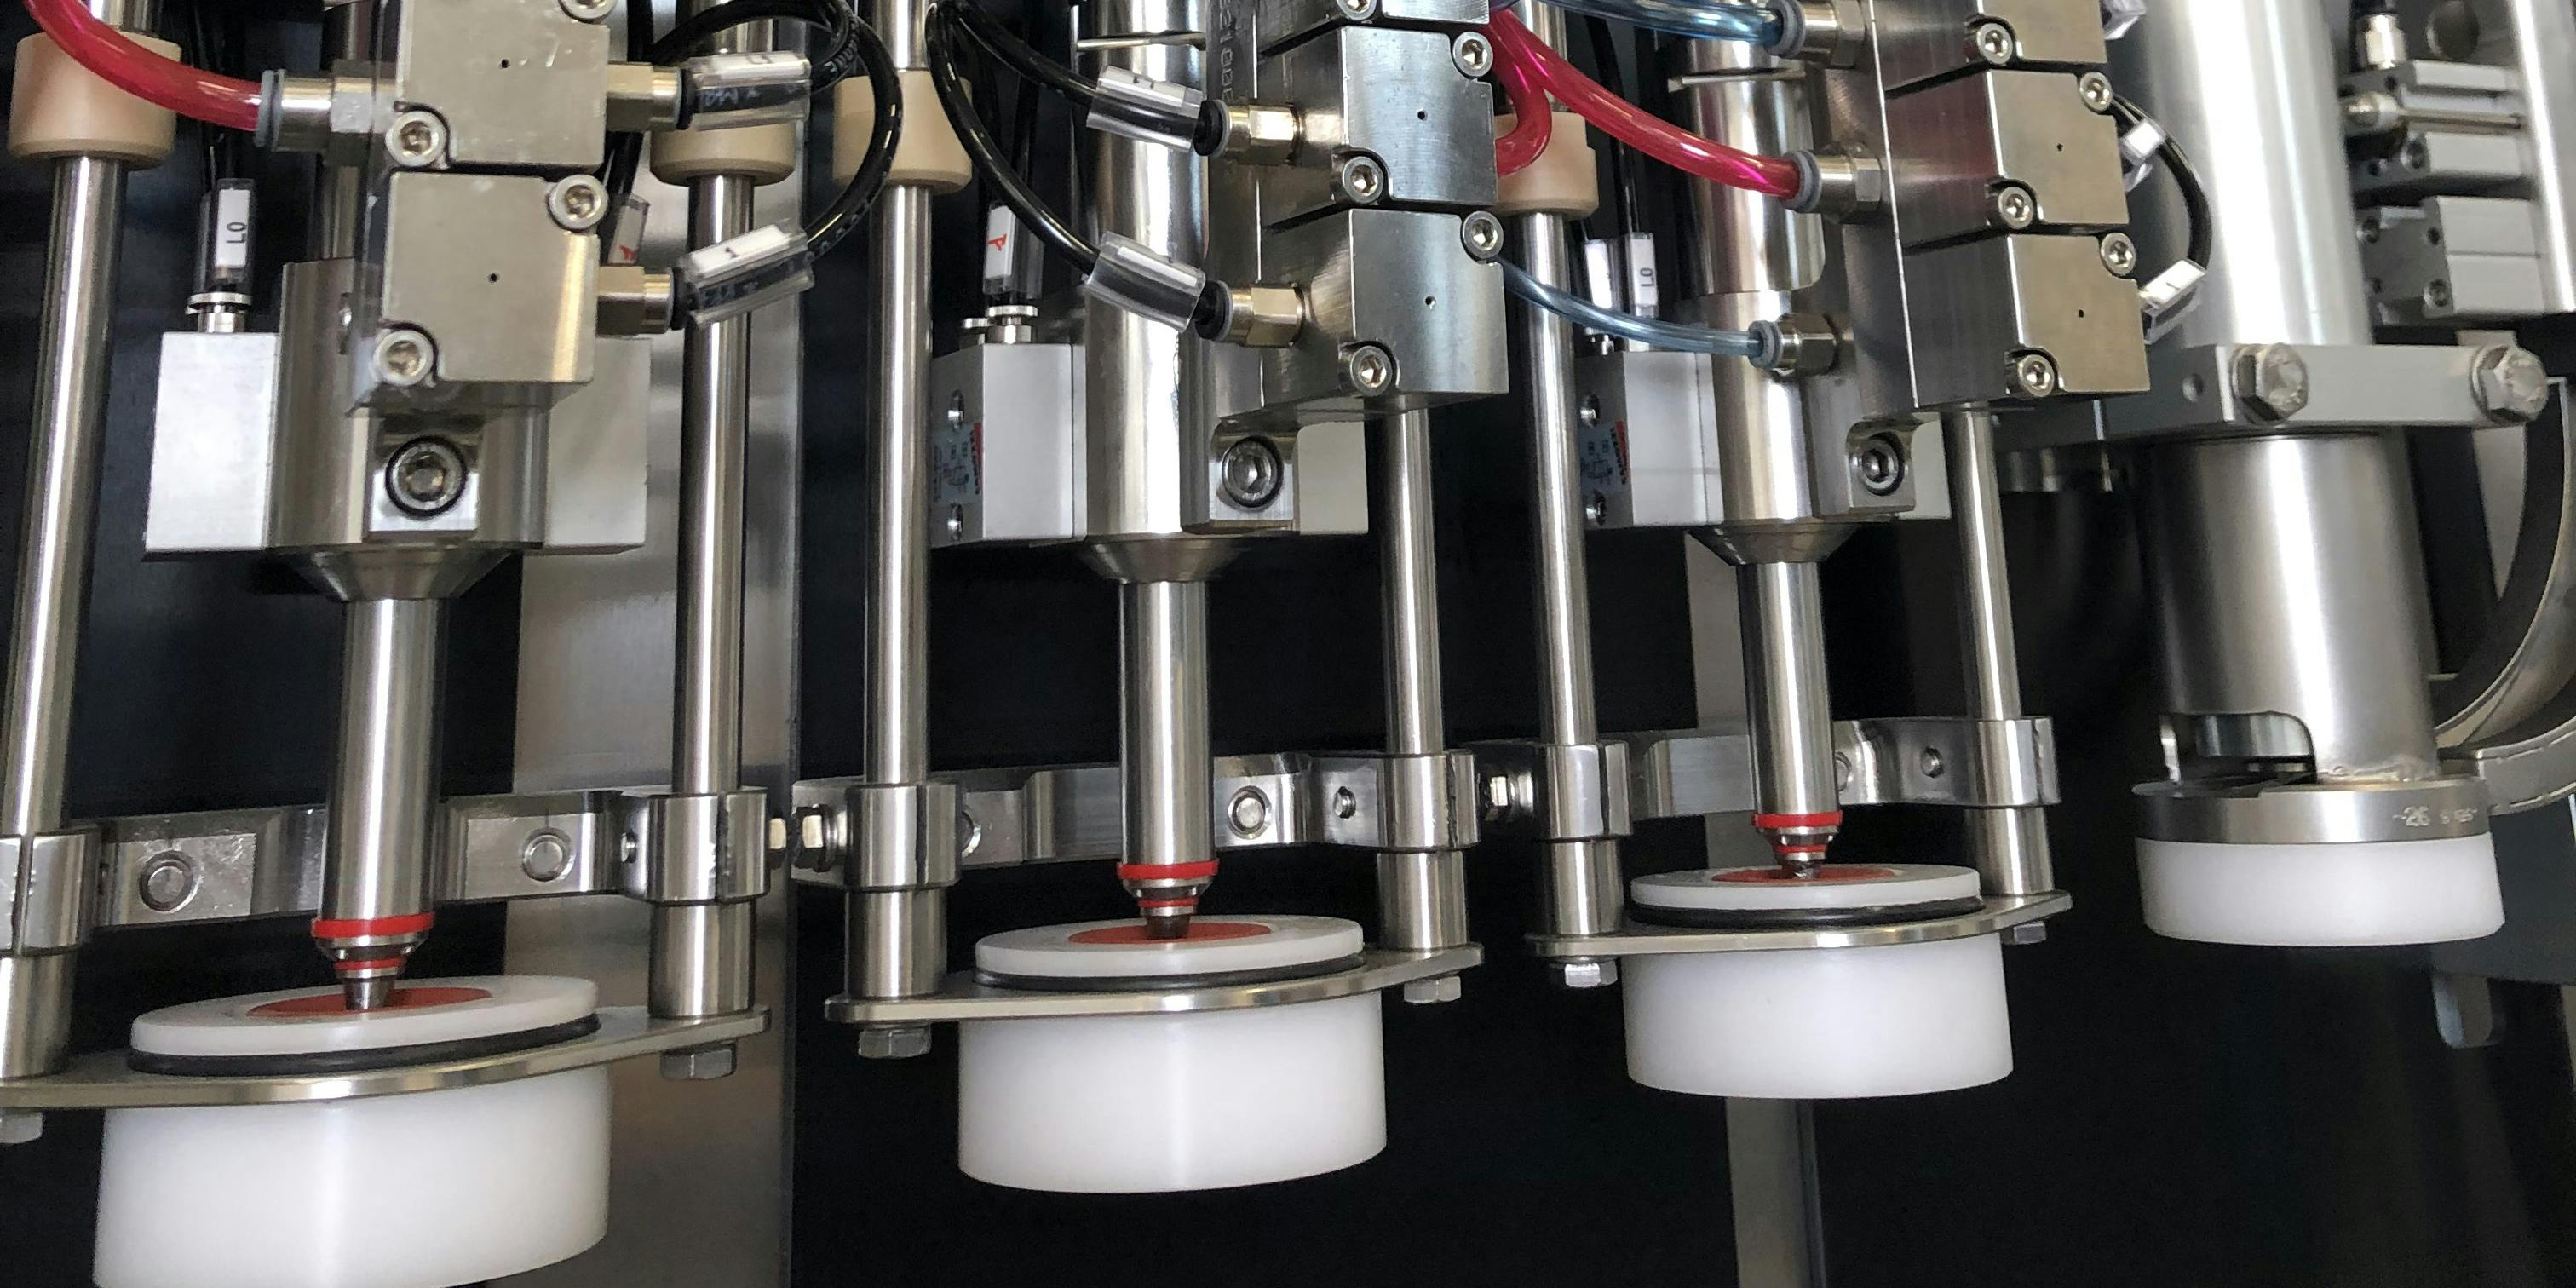 This photo showing tree RIDC (double closing isobaric nozzle) nozzles in the foreground, suitable for filling beer and wine